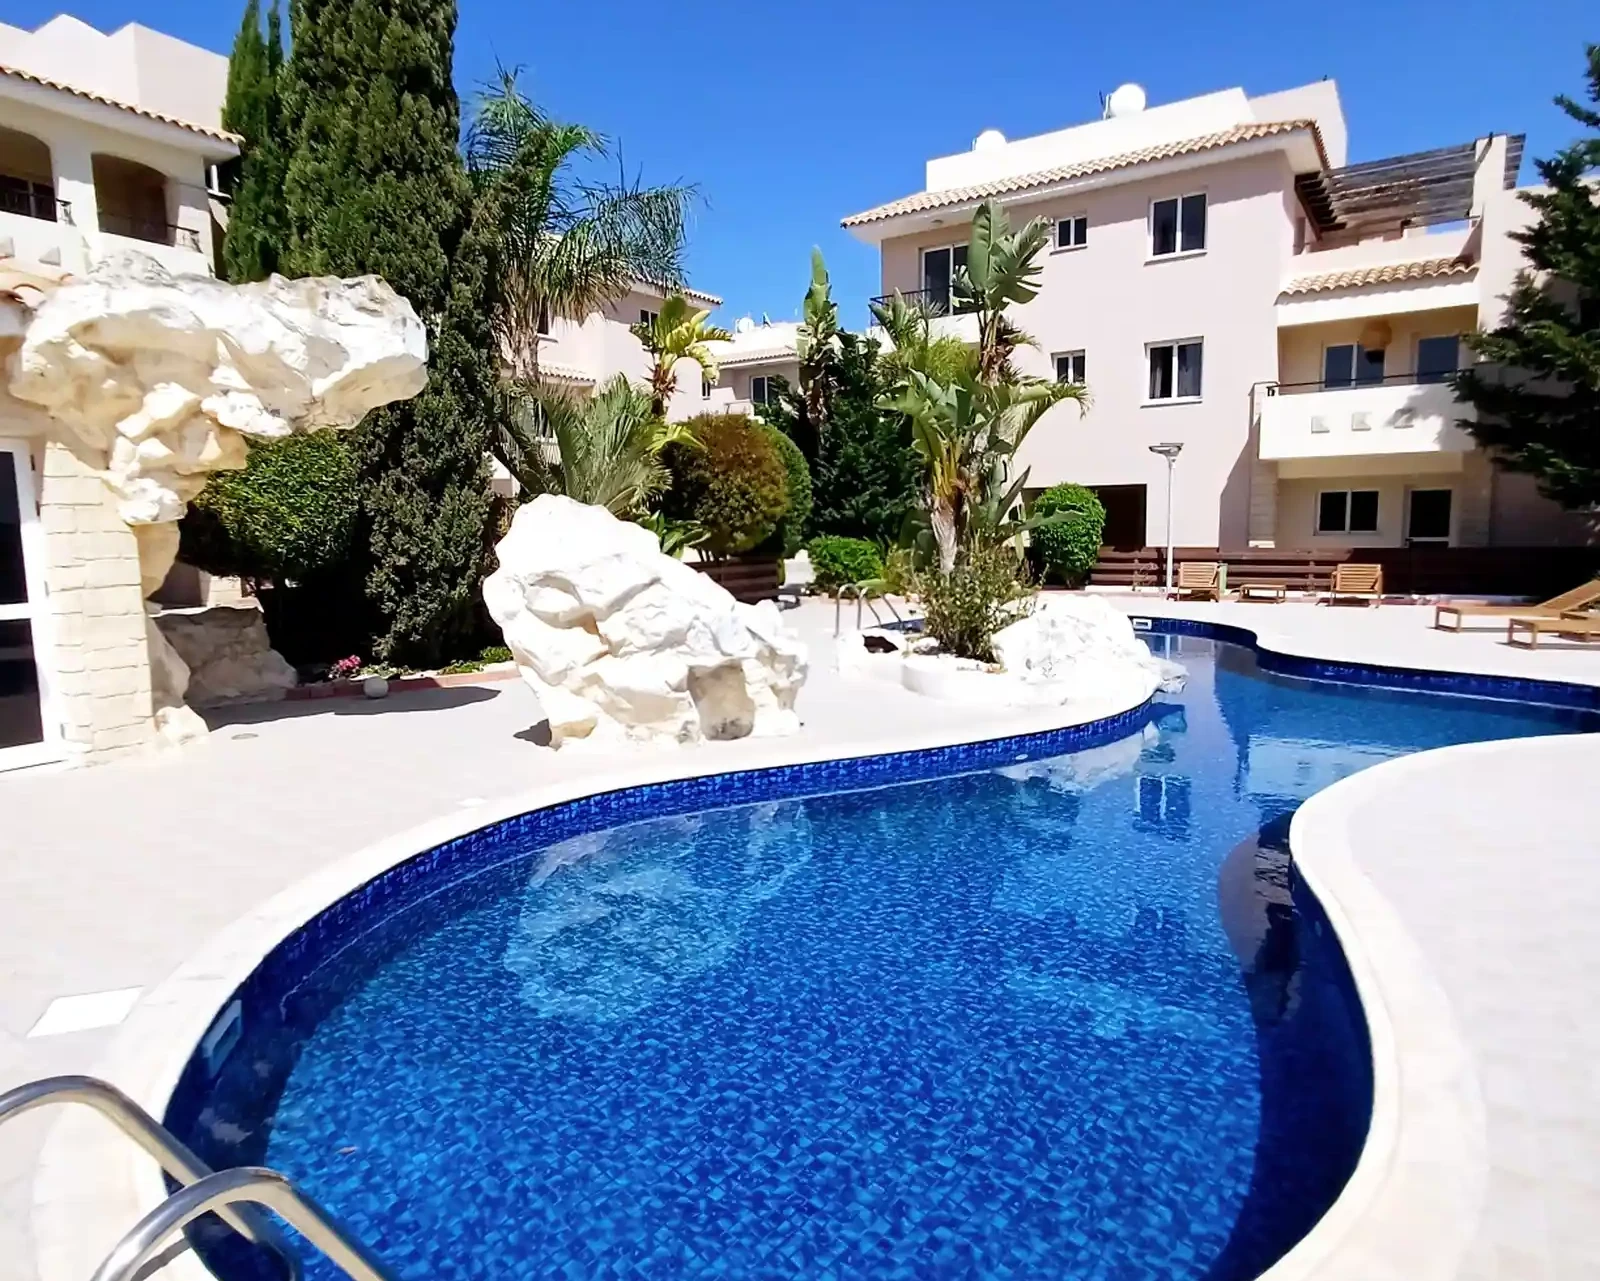 2-bedroom apartment fоr sаle €110.000, image 1